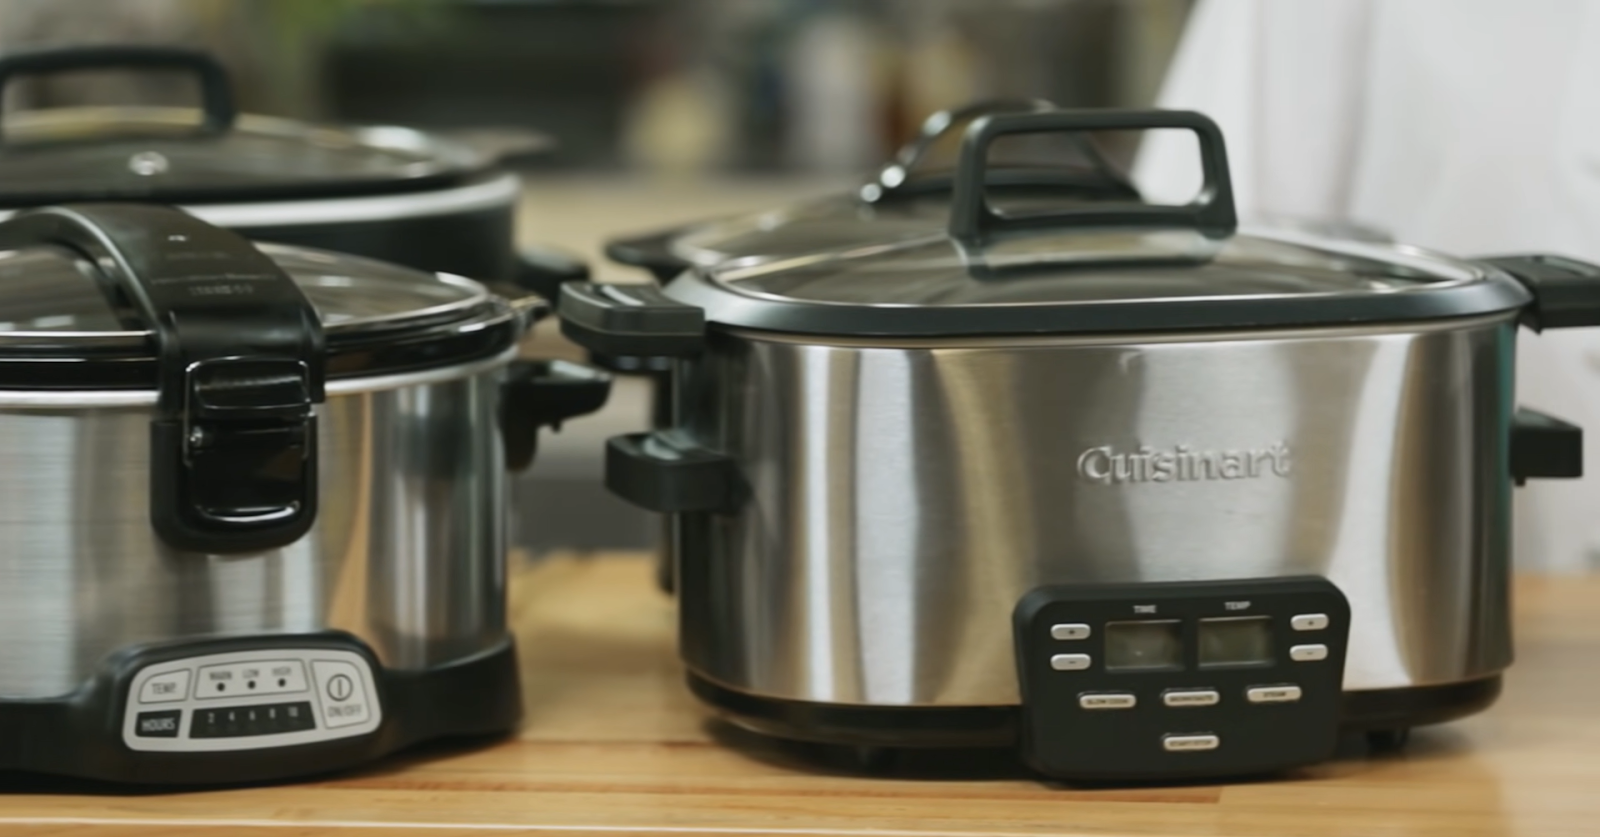 two crockpots on the table- two behind them